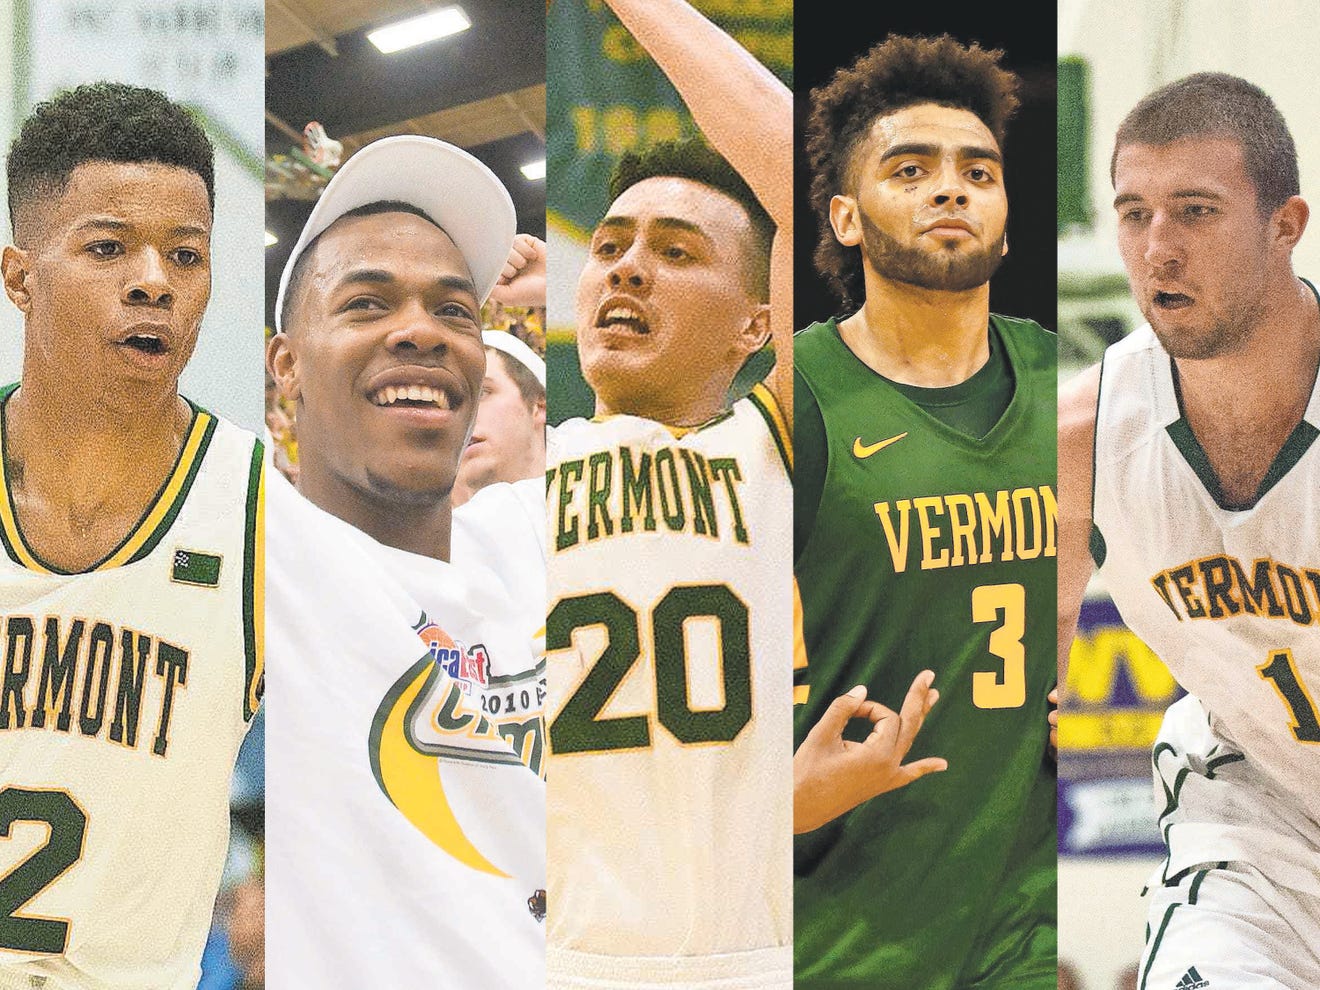 UVM men's basketball: The All-Decade Team for the 2010s